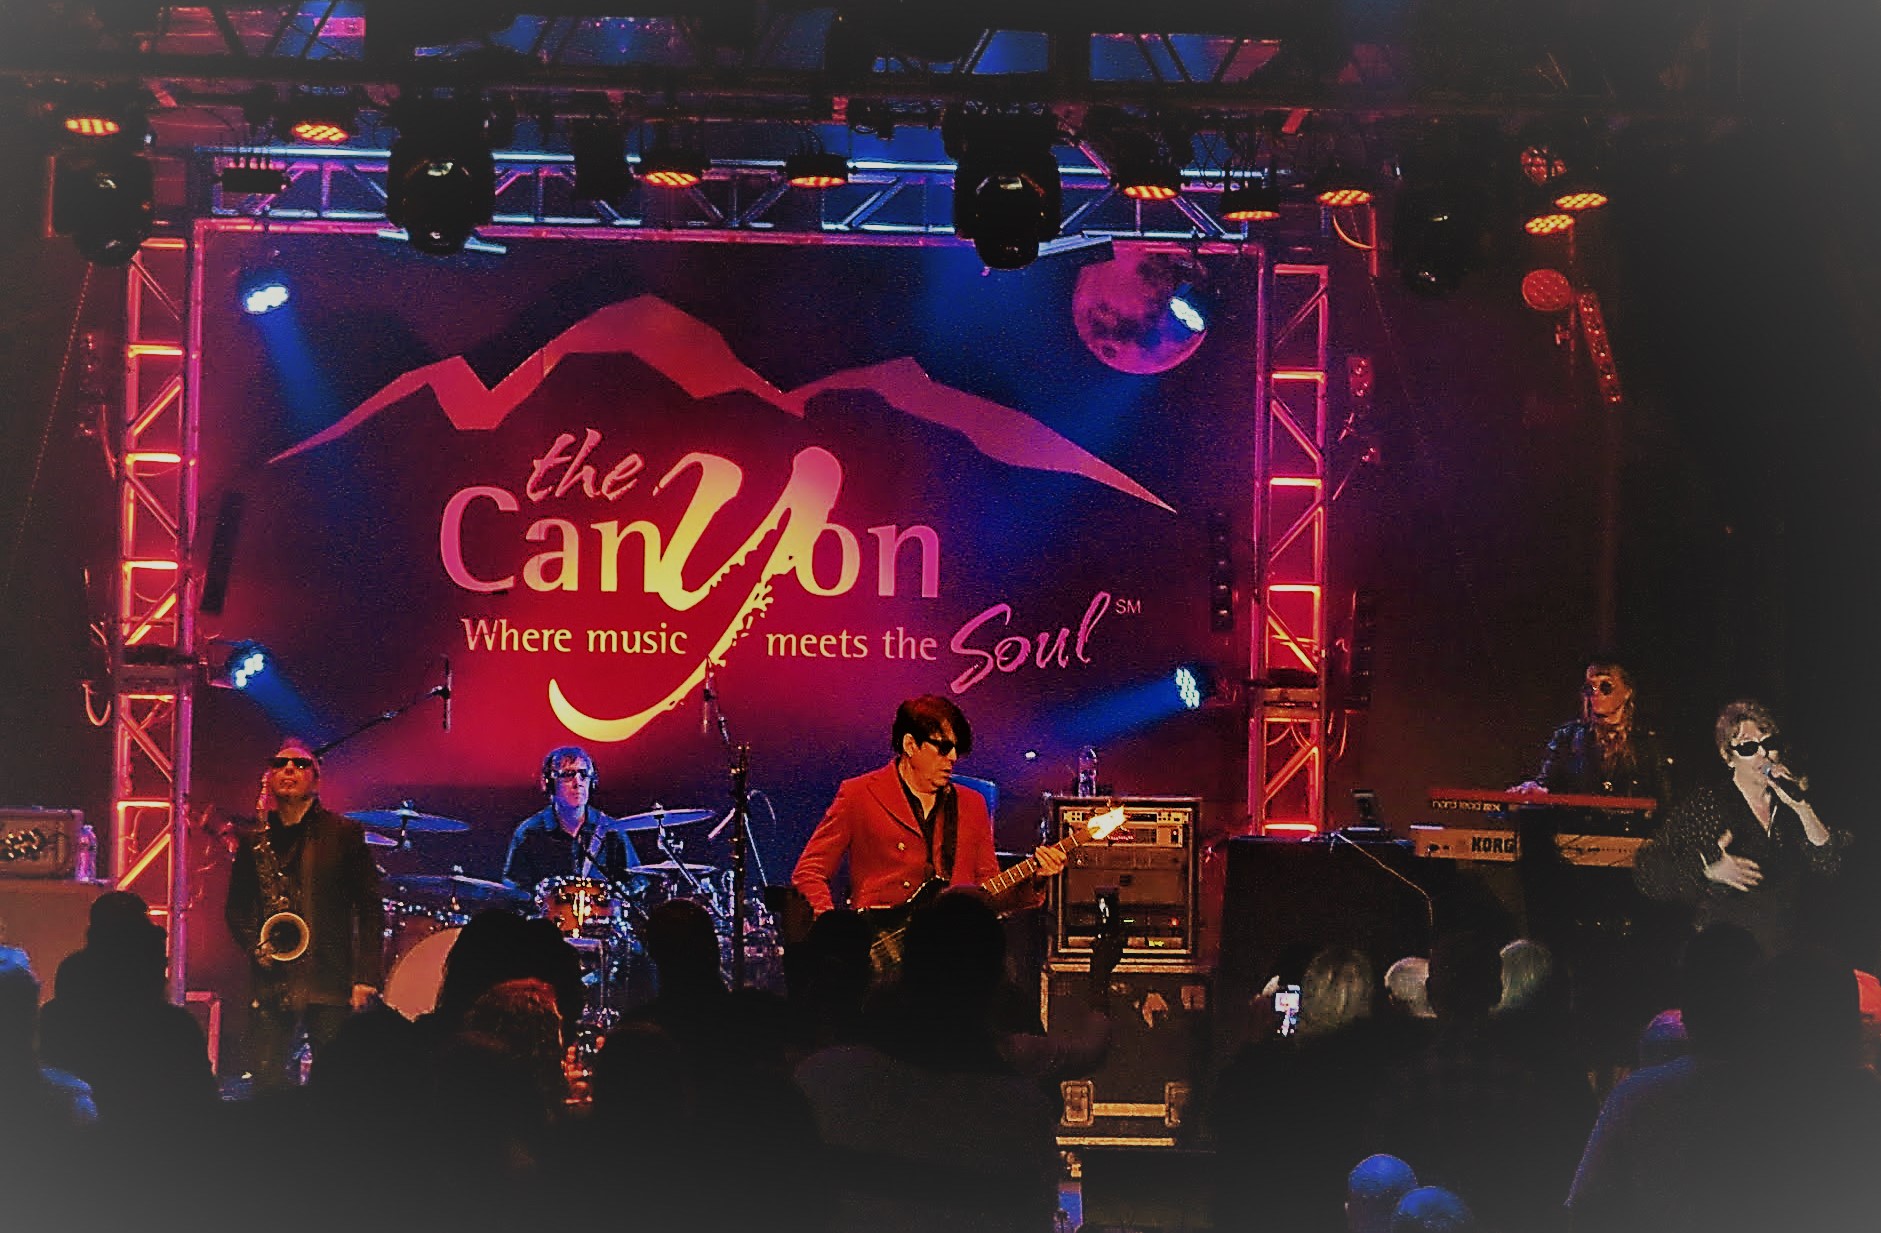 Psychedelic Furs Pack The Canyon Club in Agoura